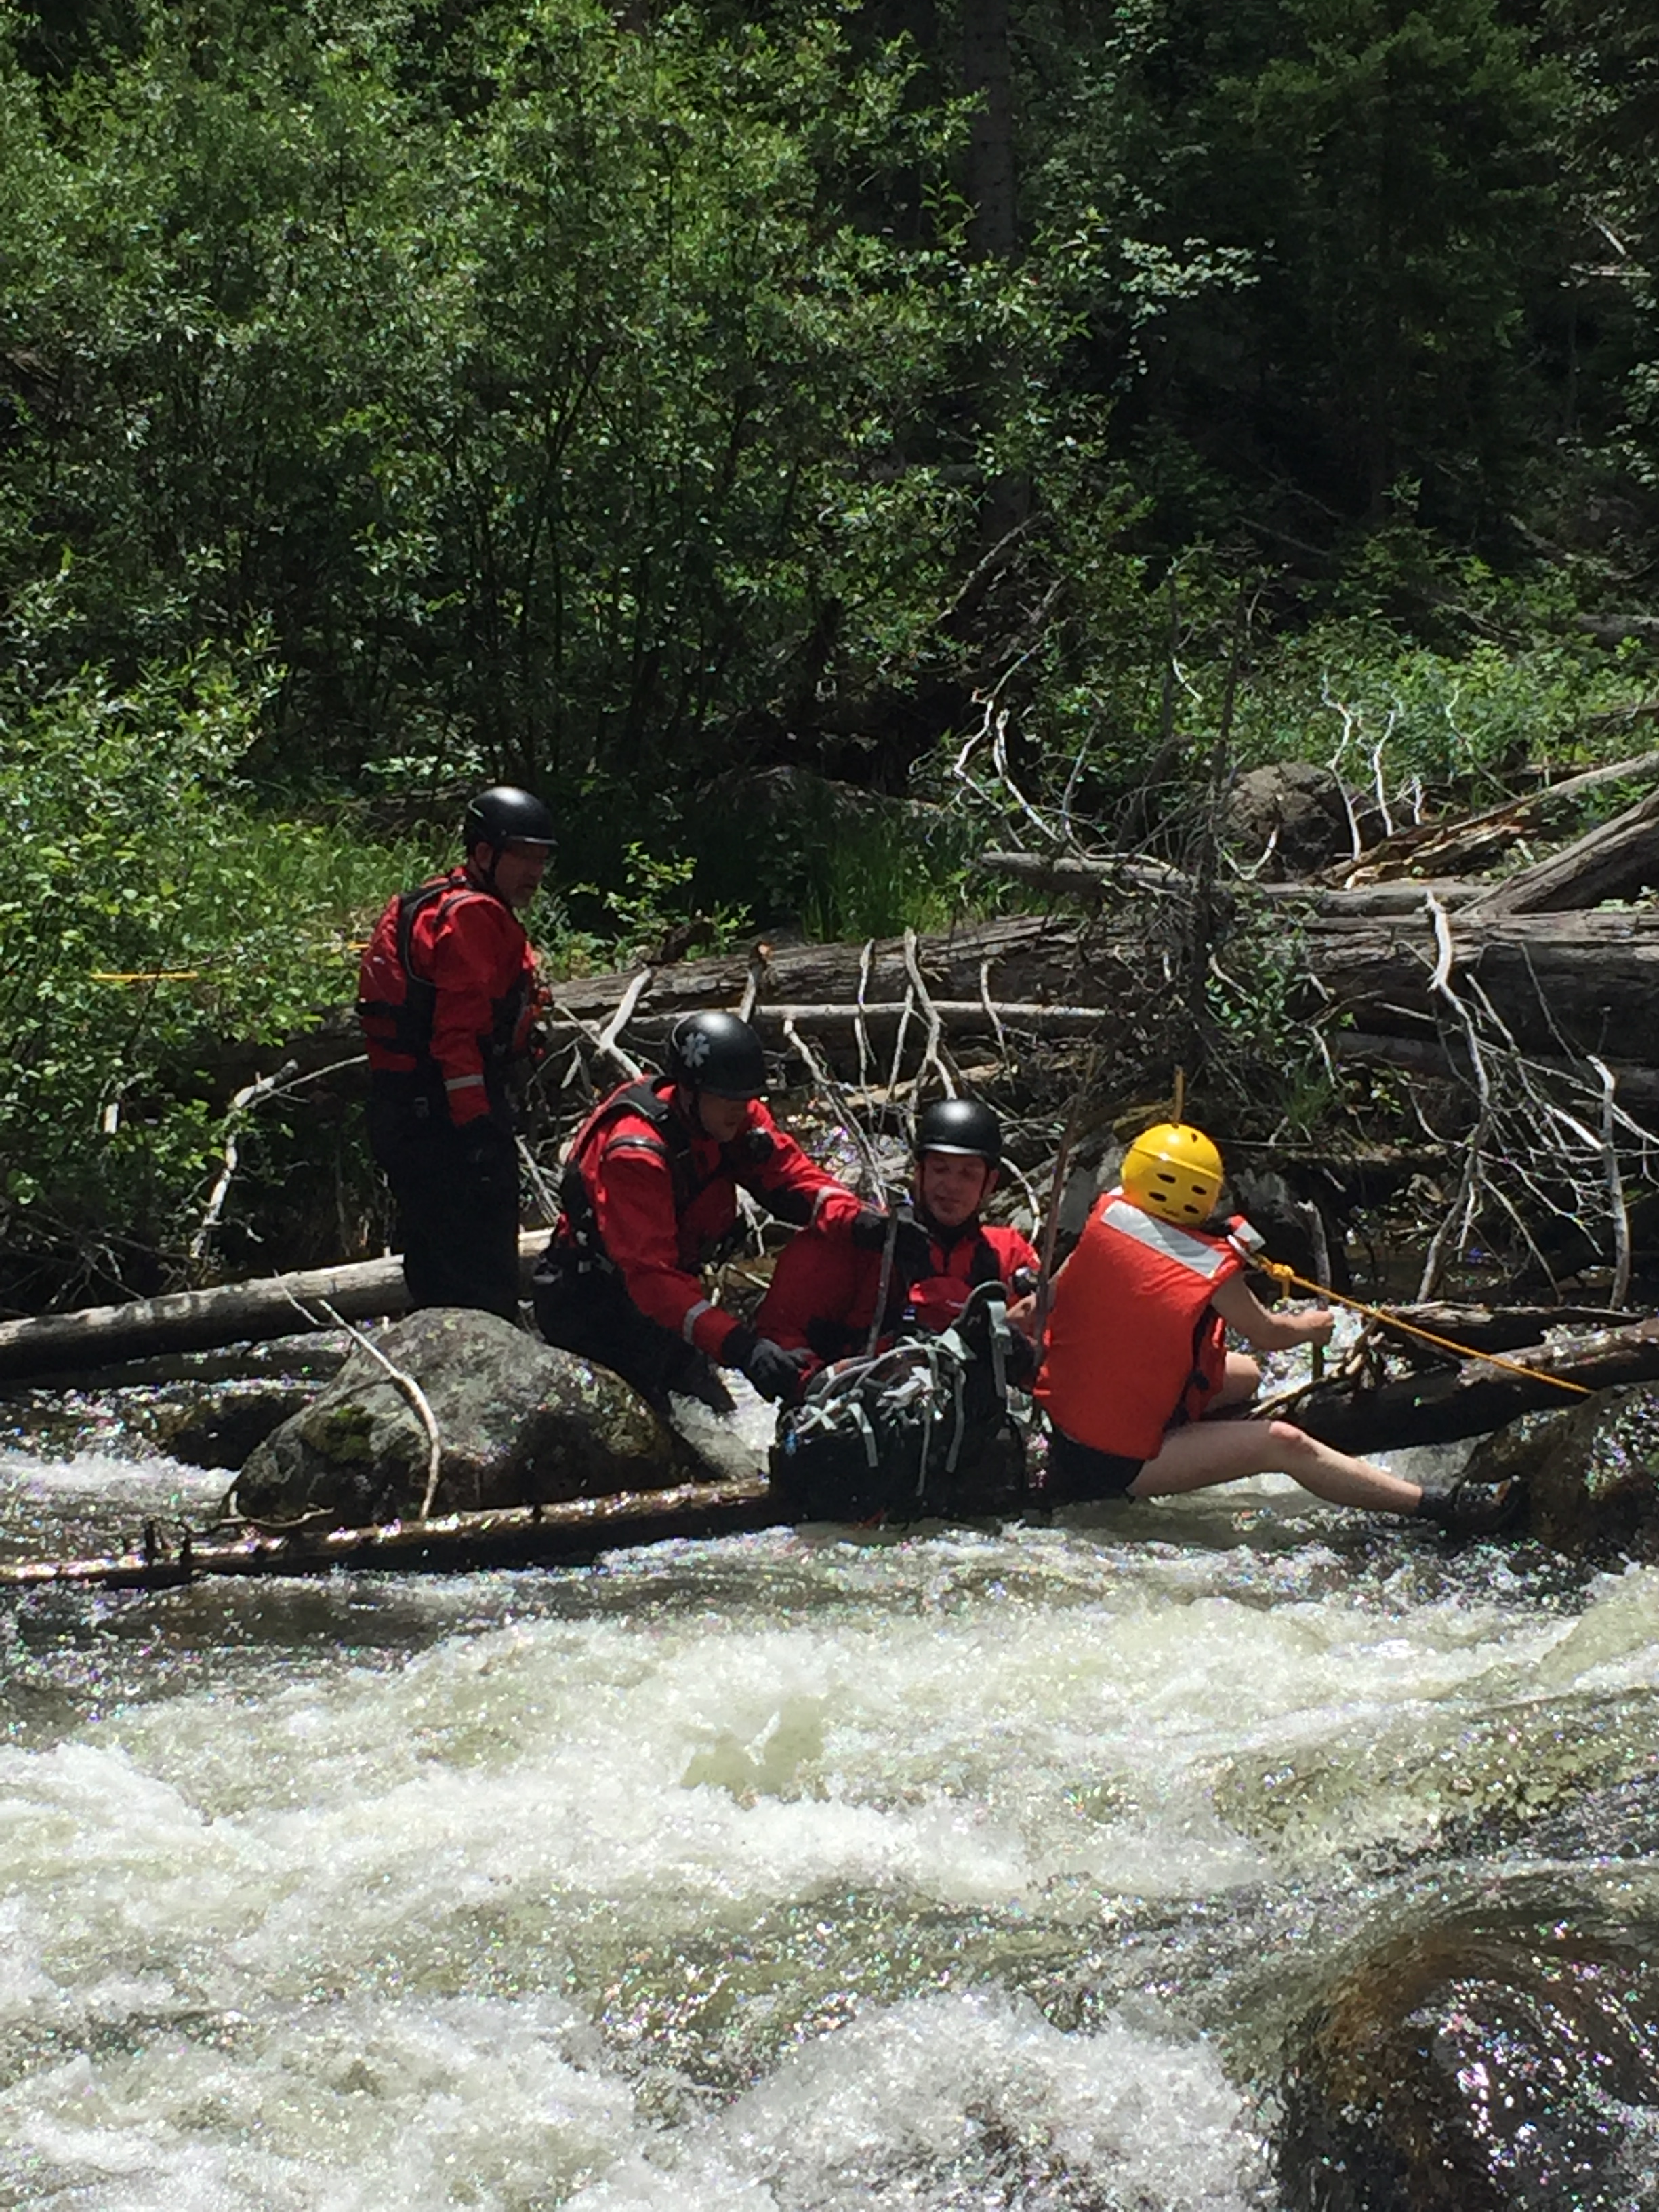 Swiftwater rescue operations